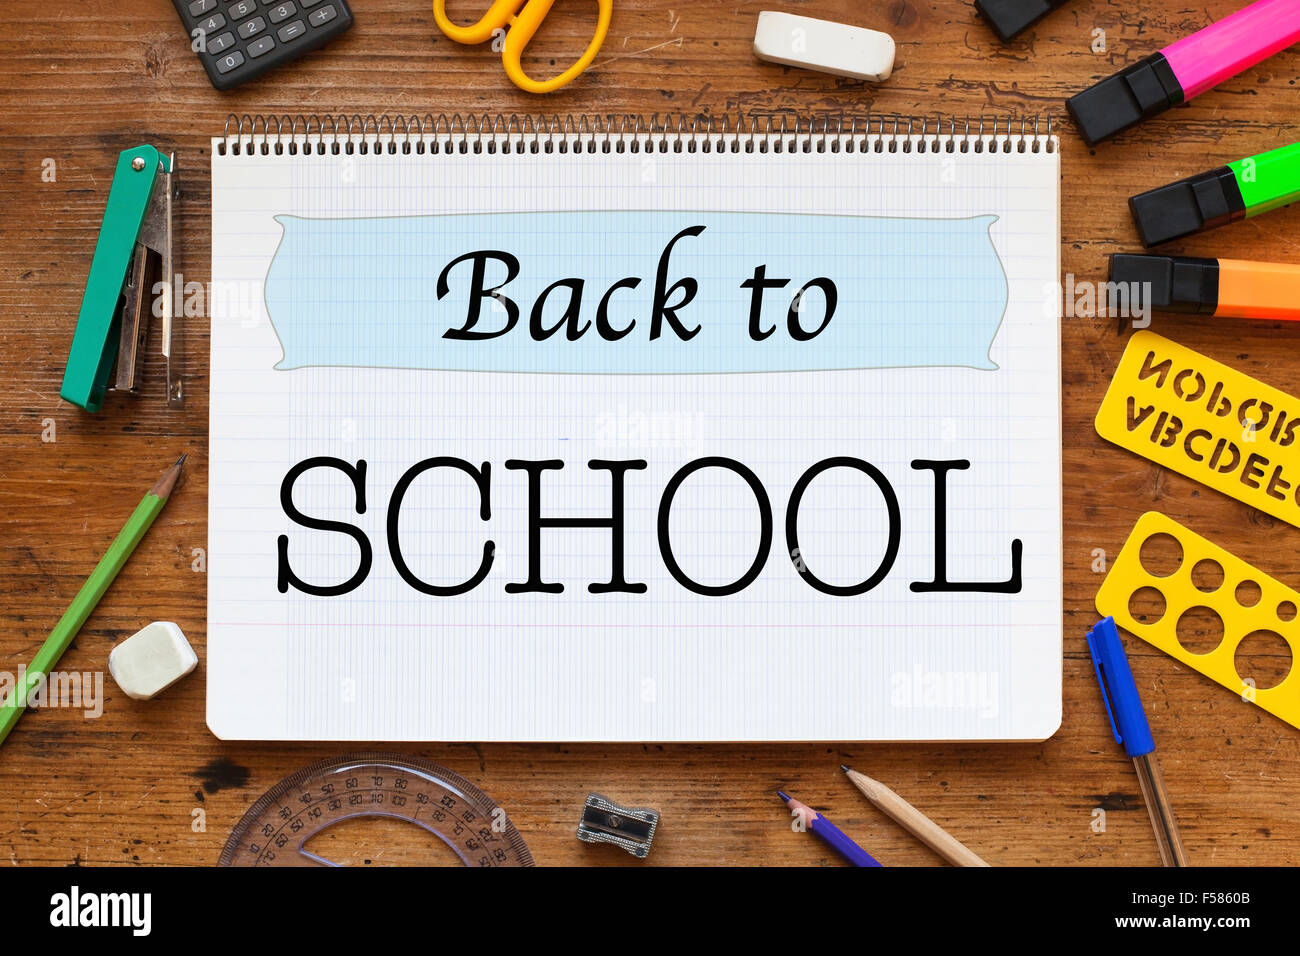 school background with place for text Stock Photo